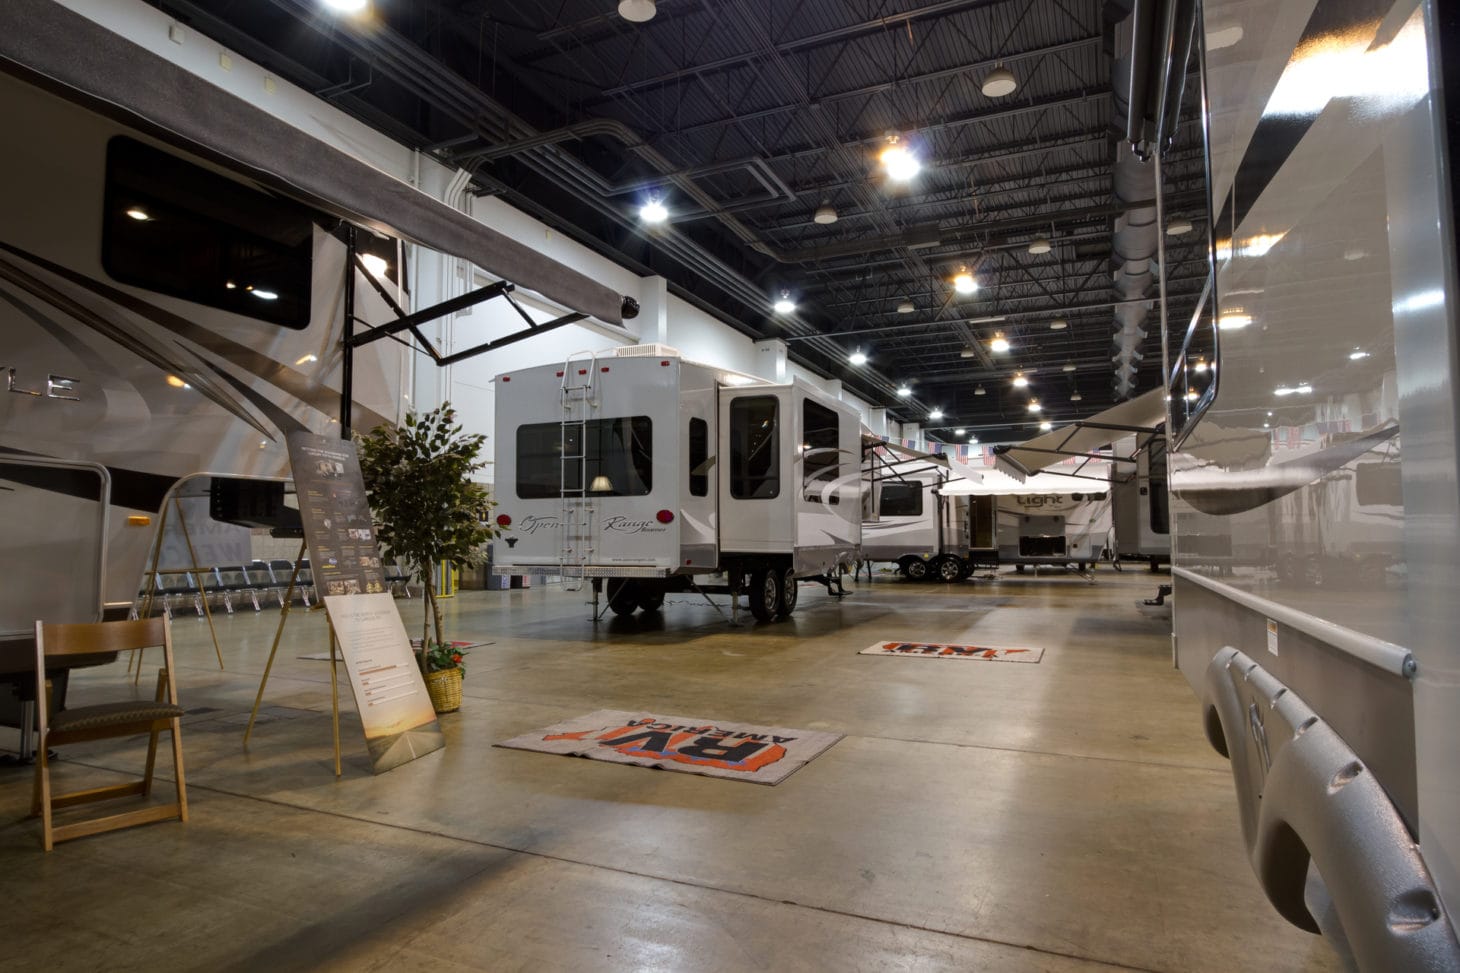 RVs on display at an RV show in a convention center